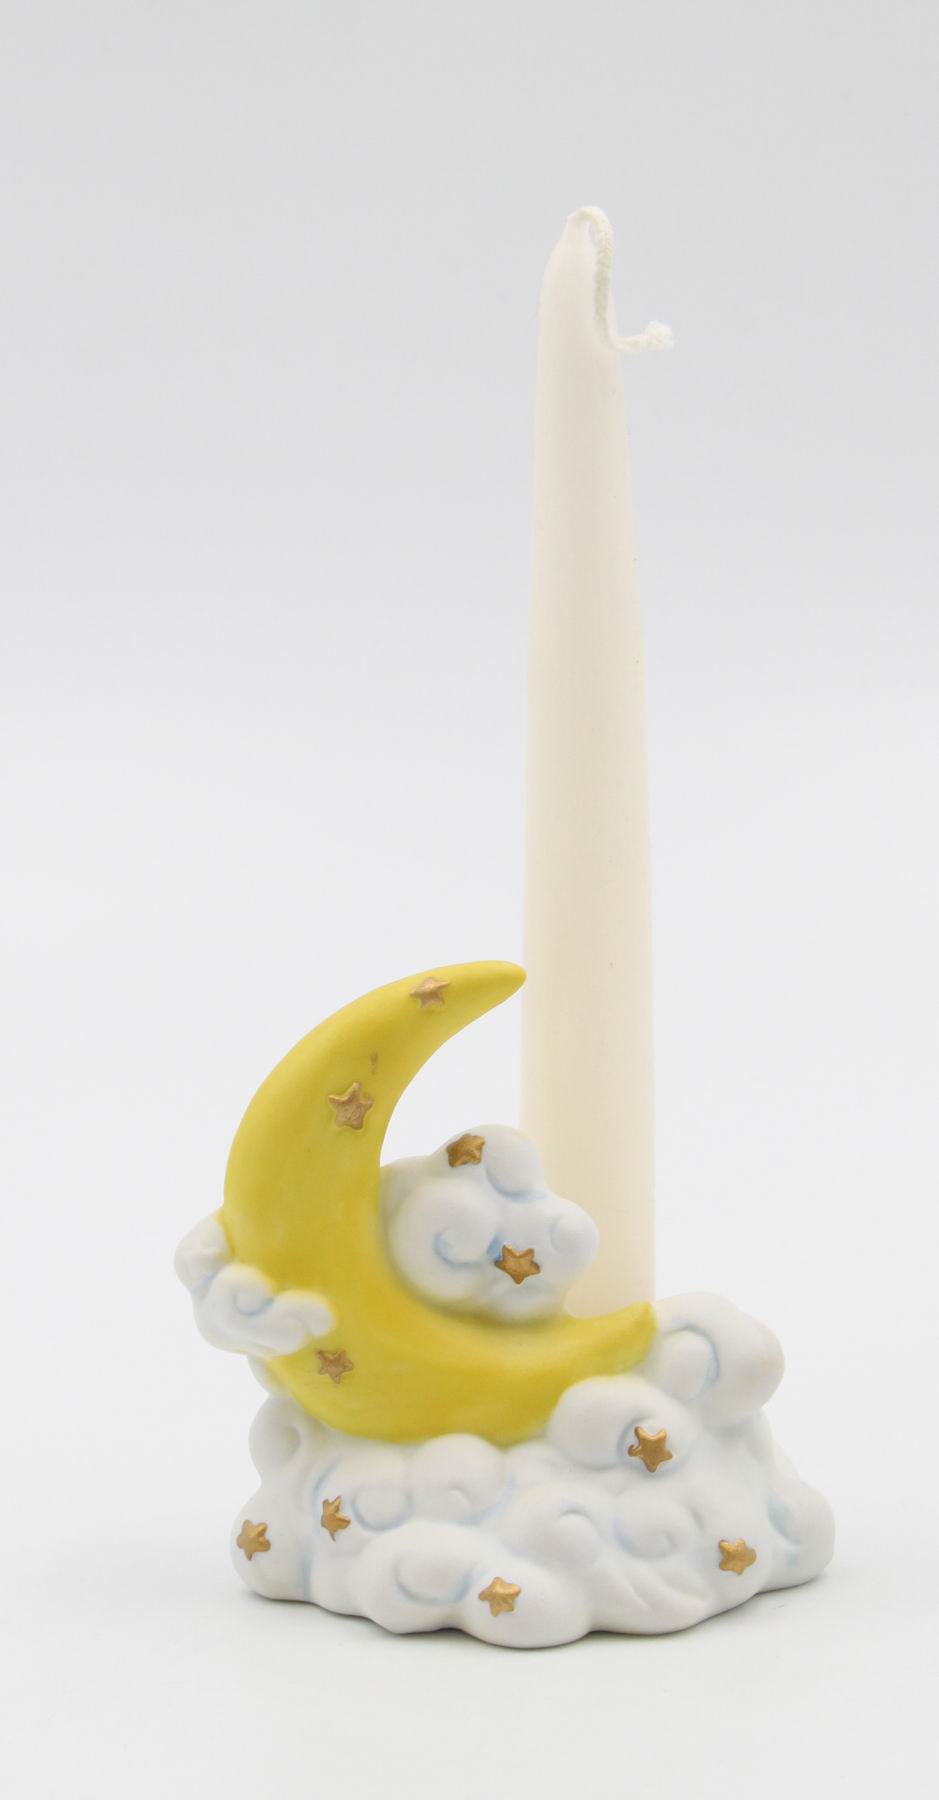 Ceramic Moon with Clouds Candle Holder, Home Décor, Gift for Her, Gift for Mom, Nursery Room Decor